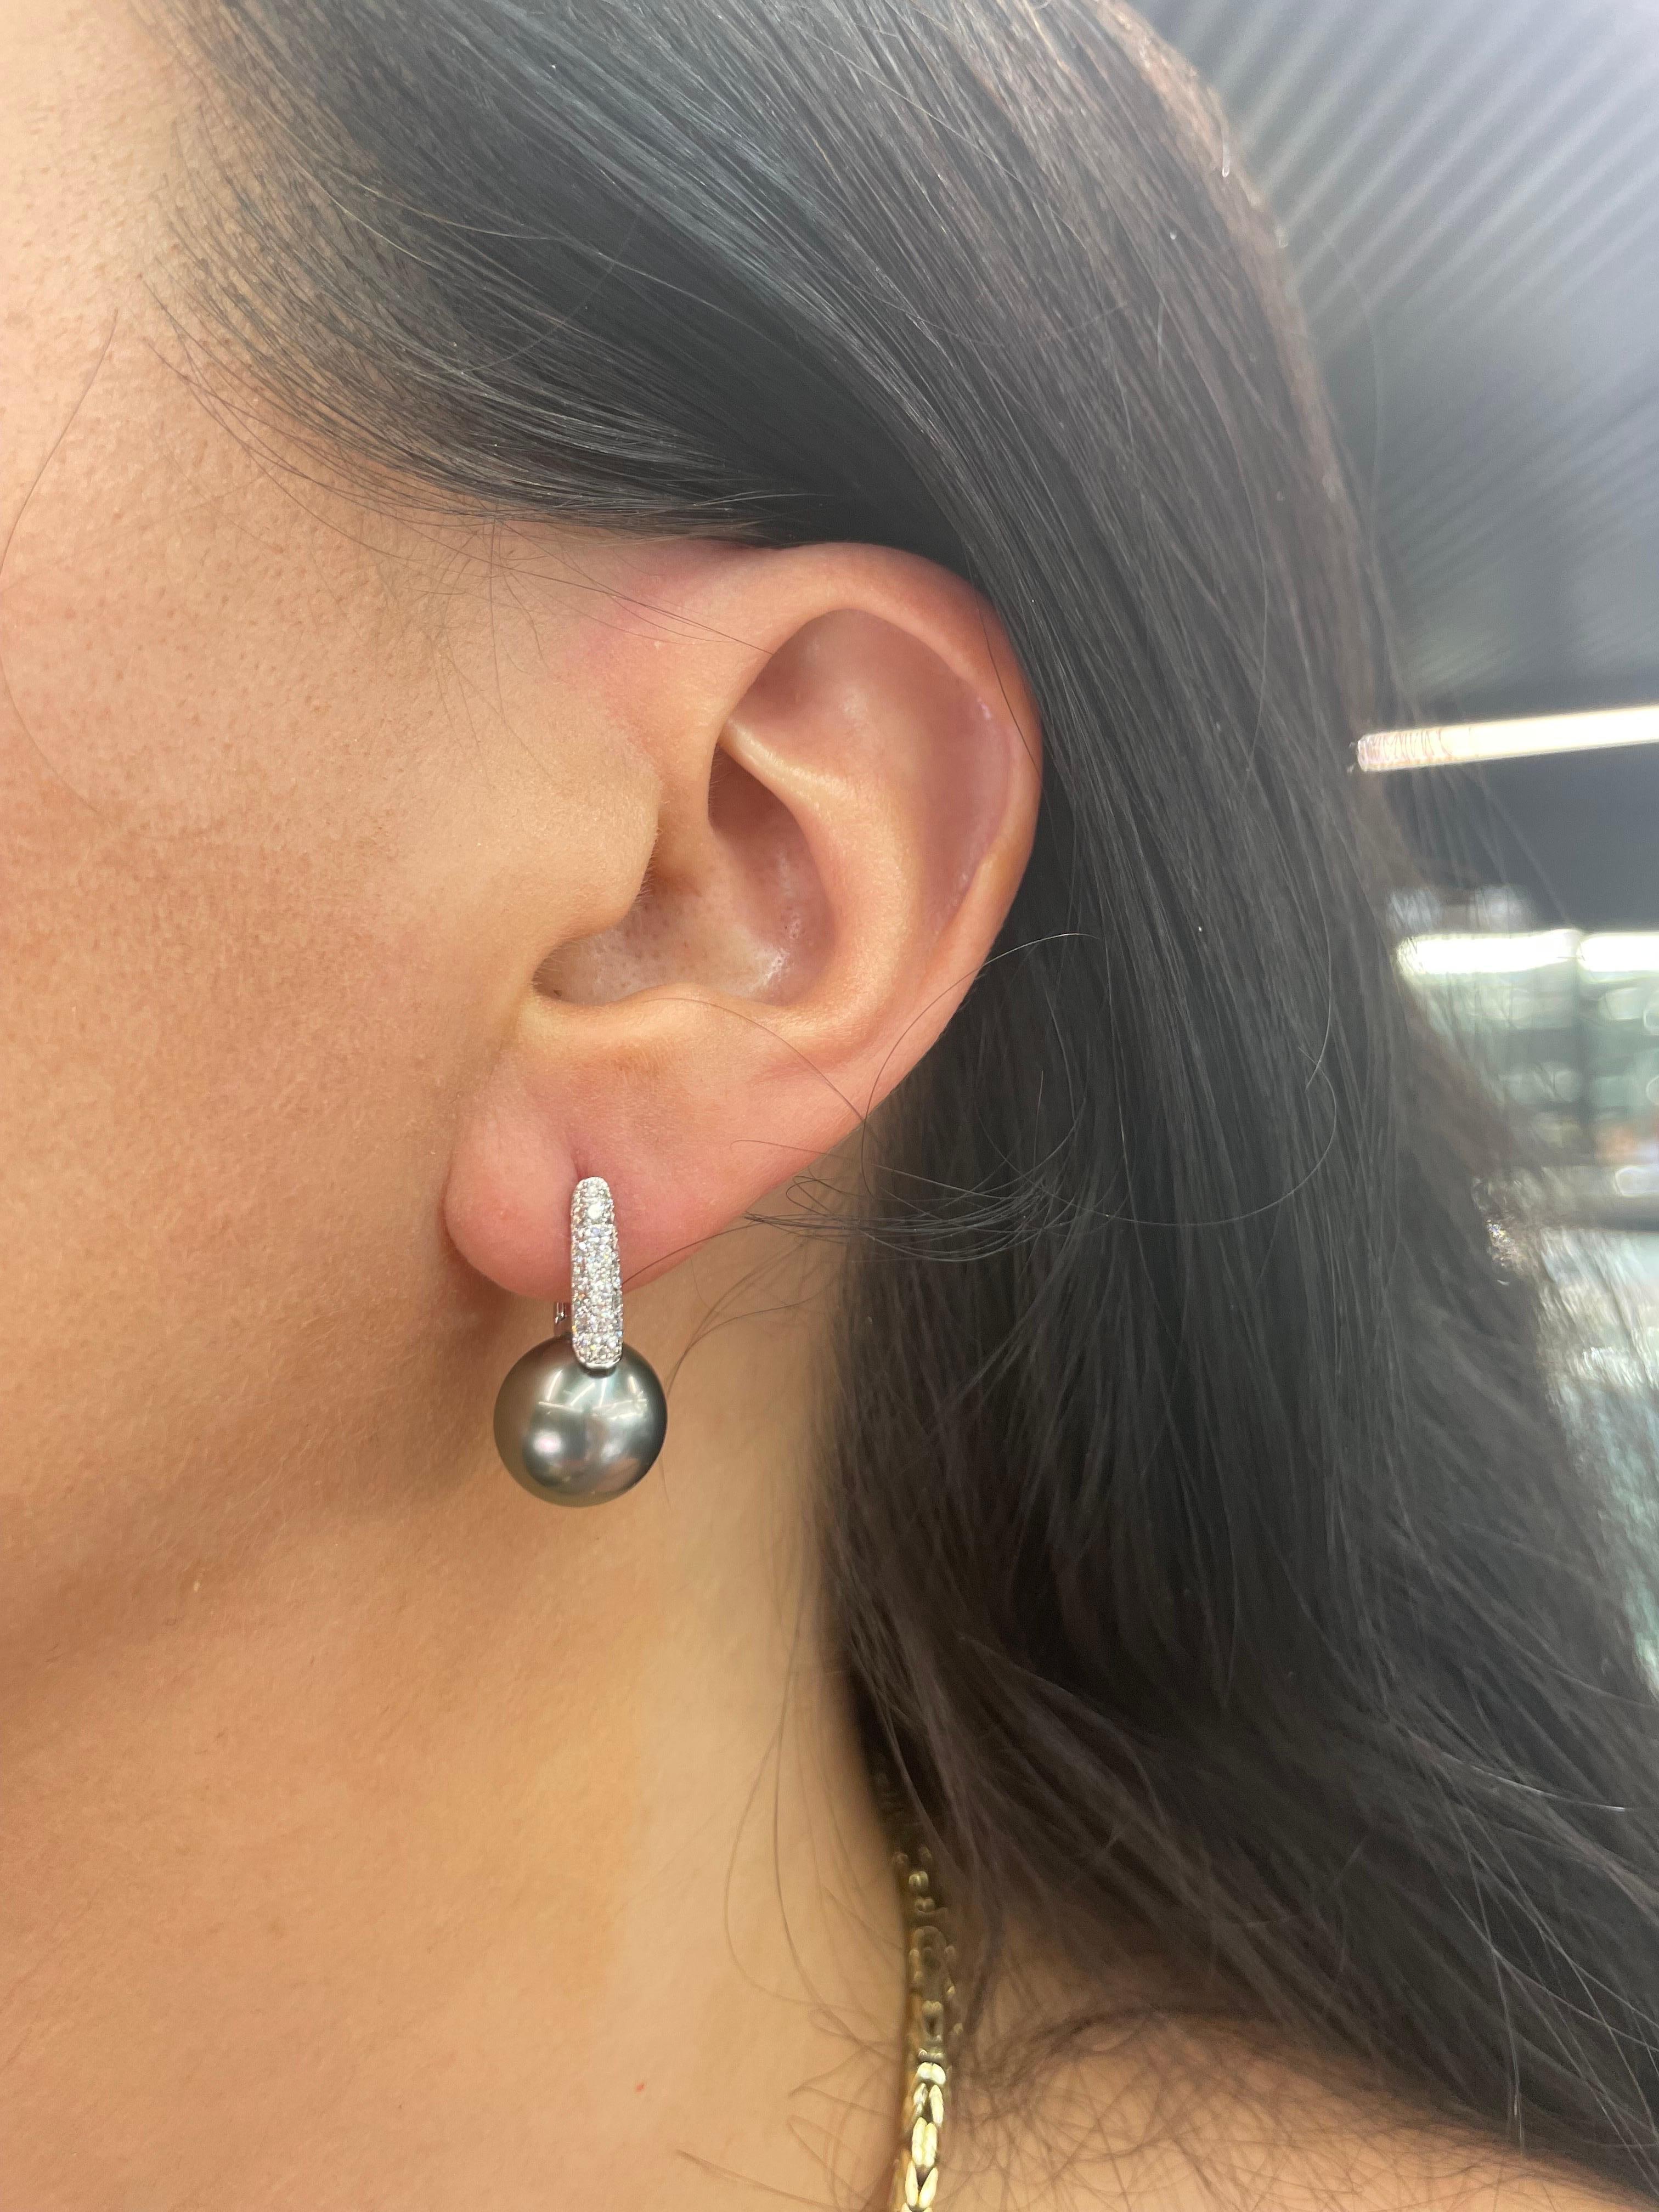 18 Karat White Gold drop earrings featuring 38 round brilliants weighing 0.61 carats with two Tahitian Pearls measuring 12-13 MM.
Color G-H
Clarity SI

Can be ordered in Gold South Sea, White South Sea or Pink Freshwater Pearls 